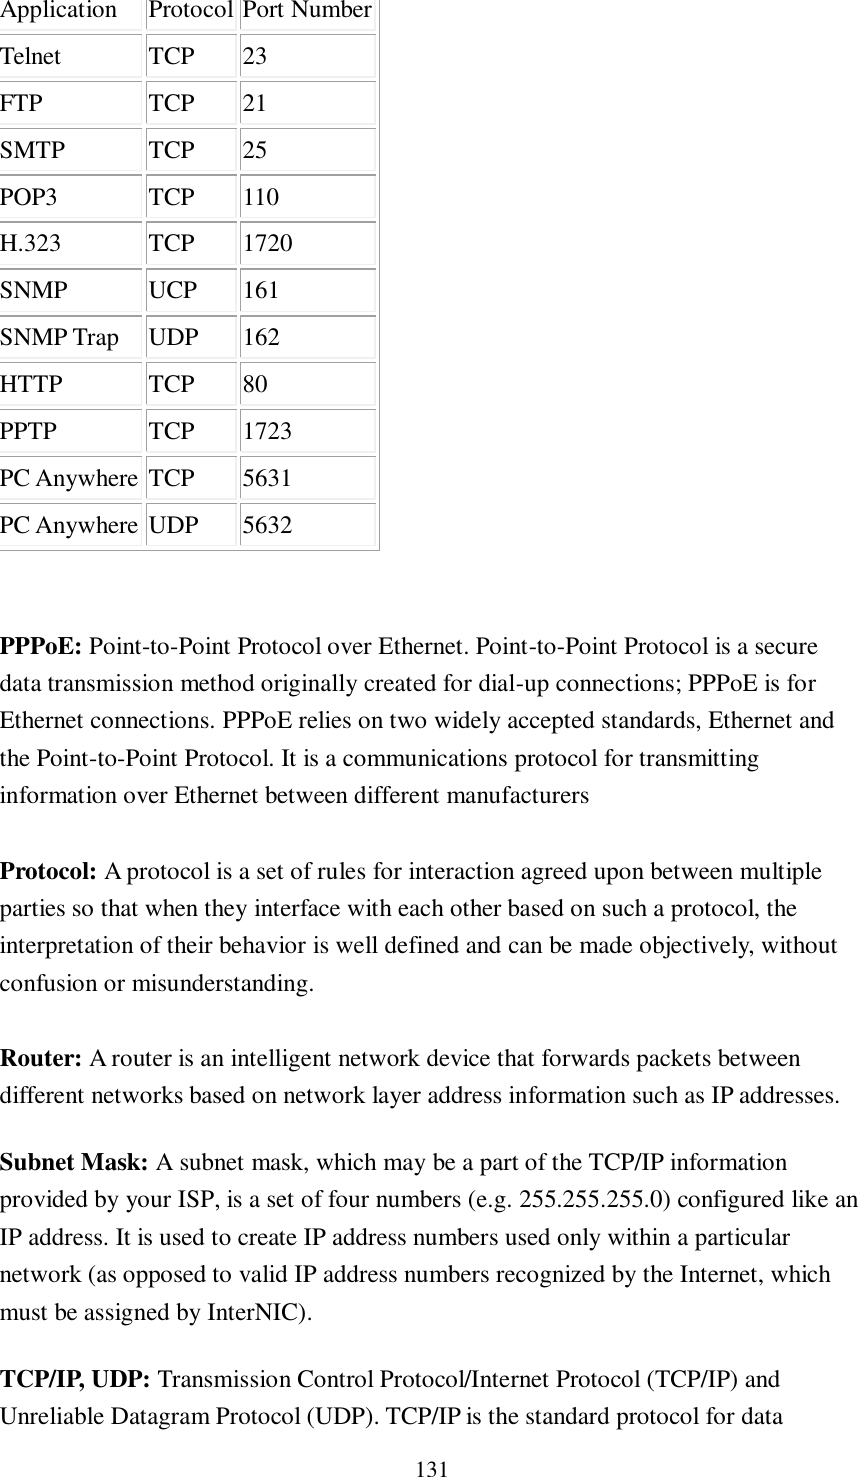 131 Application Protocol Port Number Telnet TCP 23 FTP TCP 21 SMTP TCP 25 POP3 TCP 110 H.323 TCP 1720 SNMP UCP 161 SNMP Trap UDP 162 HTTP TCP 80 PPTP TCP 1723 PC Anywhere TCP 5631 PC Anywhere UDP 5632   PPPoE: Point-to-Point Protocol over Ethernet. Point-to-Point Protocol is a secure data transmission method originally created for dial-up connections; PPPoE is for Ethernet connections. PPPoE relies on two widely accepted standards, Ethernet and the Point-to-Point Protocol. It is a communications protocol for transmitting information over Ethernet between different manufacturers  Protocol: A protocol is a set of rules for interaction agreed upon between multiple parties so that when they interface with each other based on such a protocol, the interpretation of their behavior is well defined and can be made objectively, without confusion or misunderstanding.    Router: A router is an intelligent network device that forwards packets between different networks based on network layer address information such as IP addresses. Subnet Mask: A subnet mask, which may be a part of the TCP/IP information provided by your ISP, is a set of four numbers (e.g. 255.255.255.0) configured like an IP address. It is used to create IP address numbers used only within a particular network (as opposed to valid IP address numbers recognized by the Internet, which must be assigned by InterNIC).   TCP/IP, UDP: Transmission Control Protocol/Internet Protocol (TCP/IP) and Unreliable Datagram Protocol (UDP). TCP/IP is the standard protocol for data 